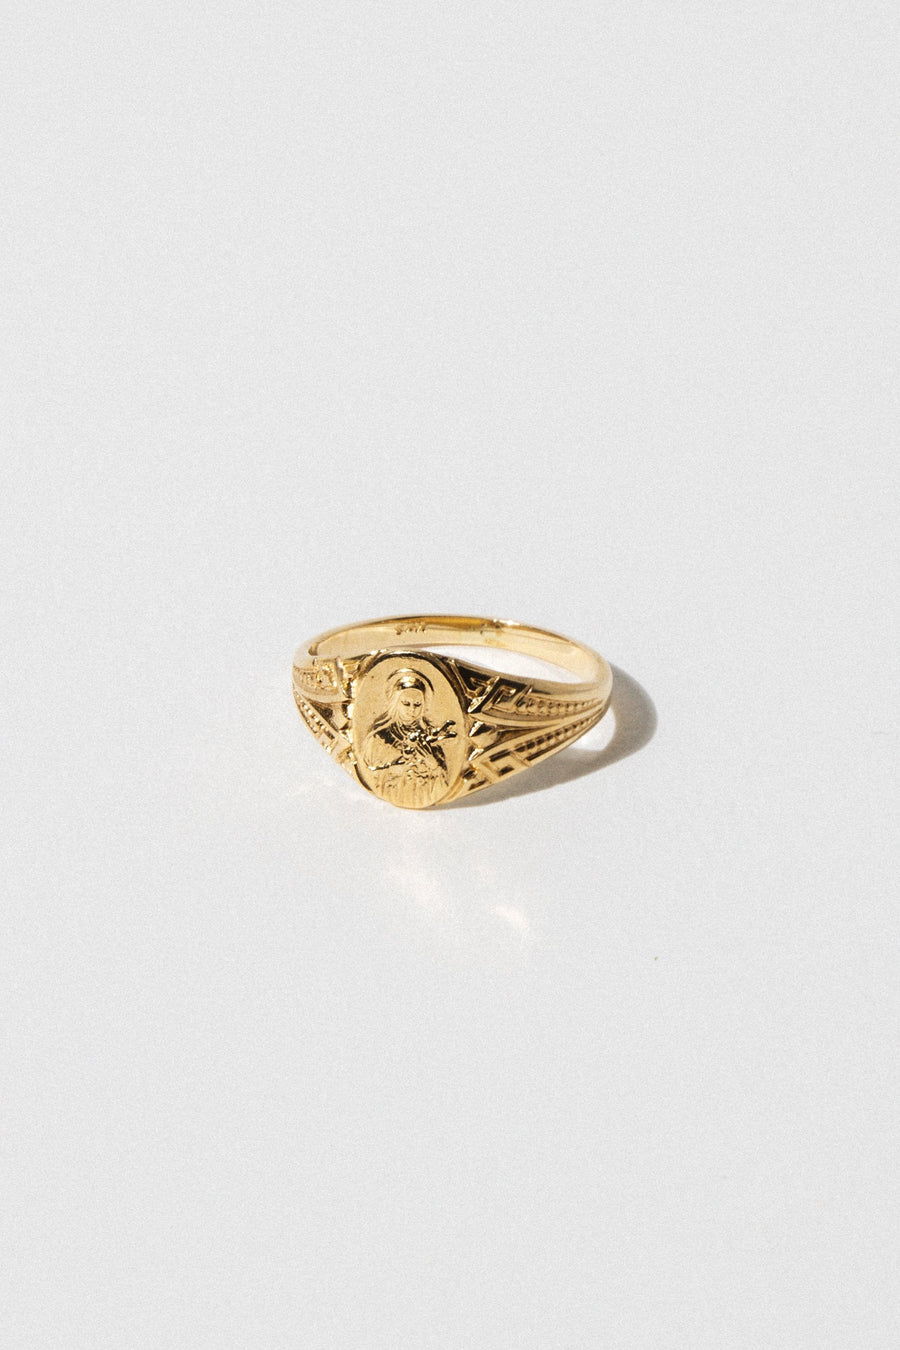 Stuller Jewelry Mother Madonna Ring